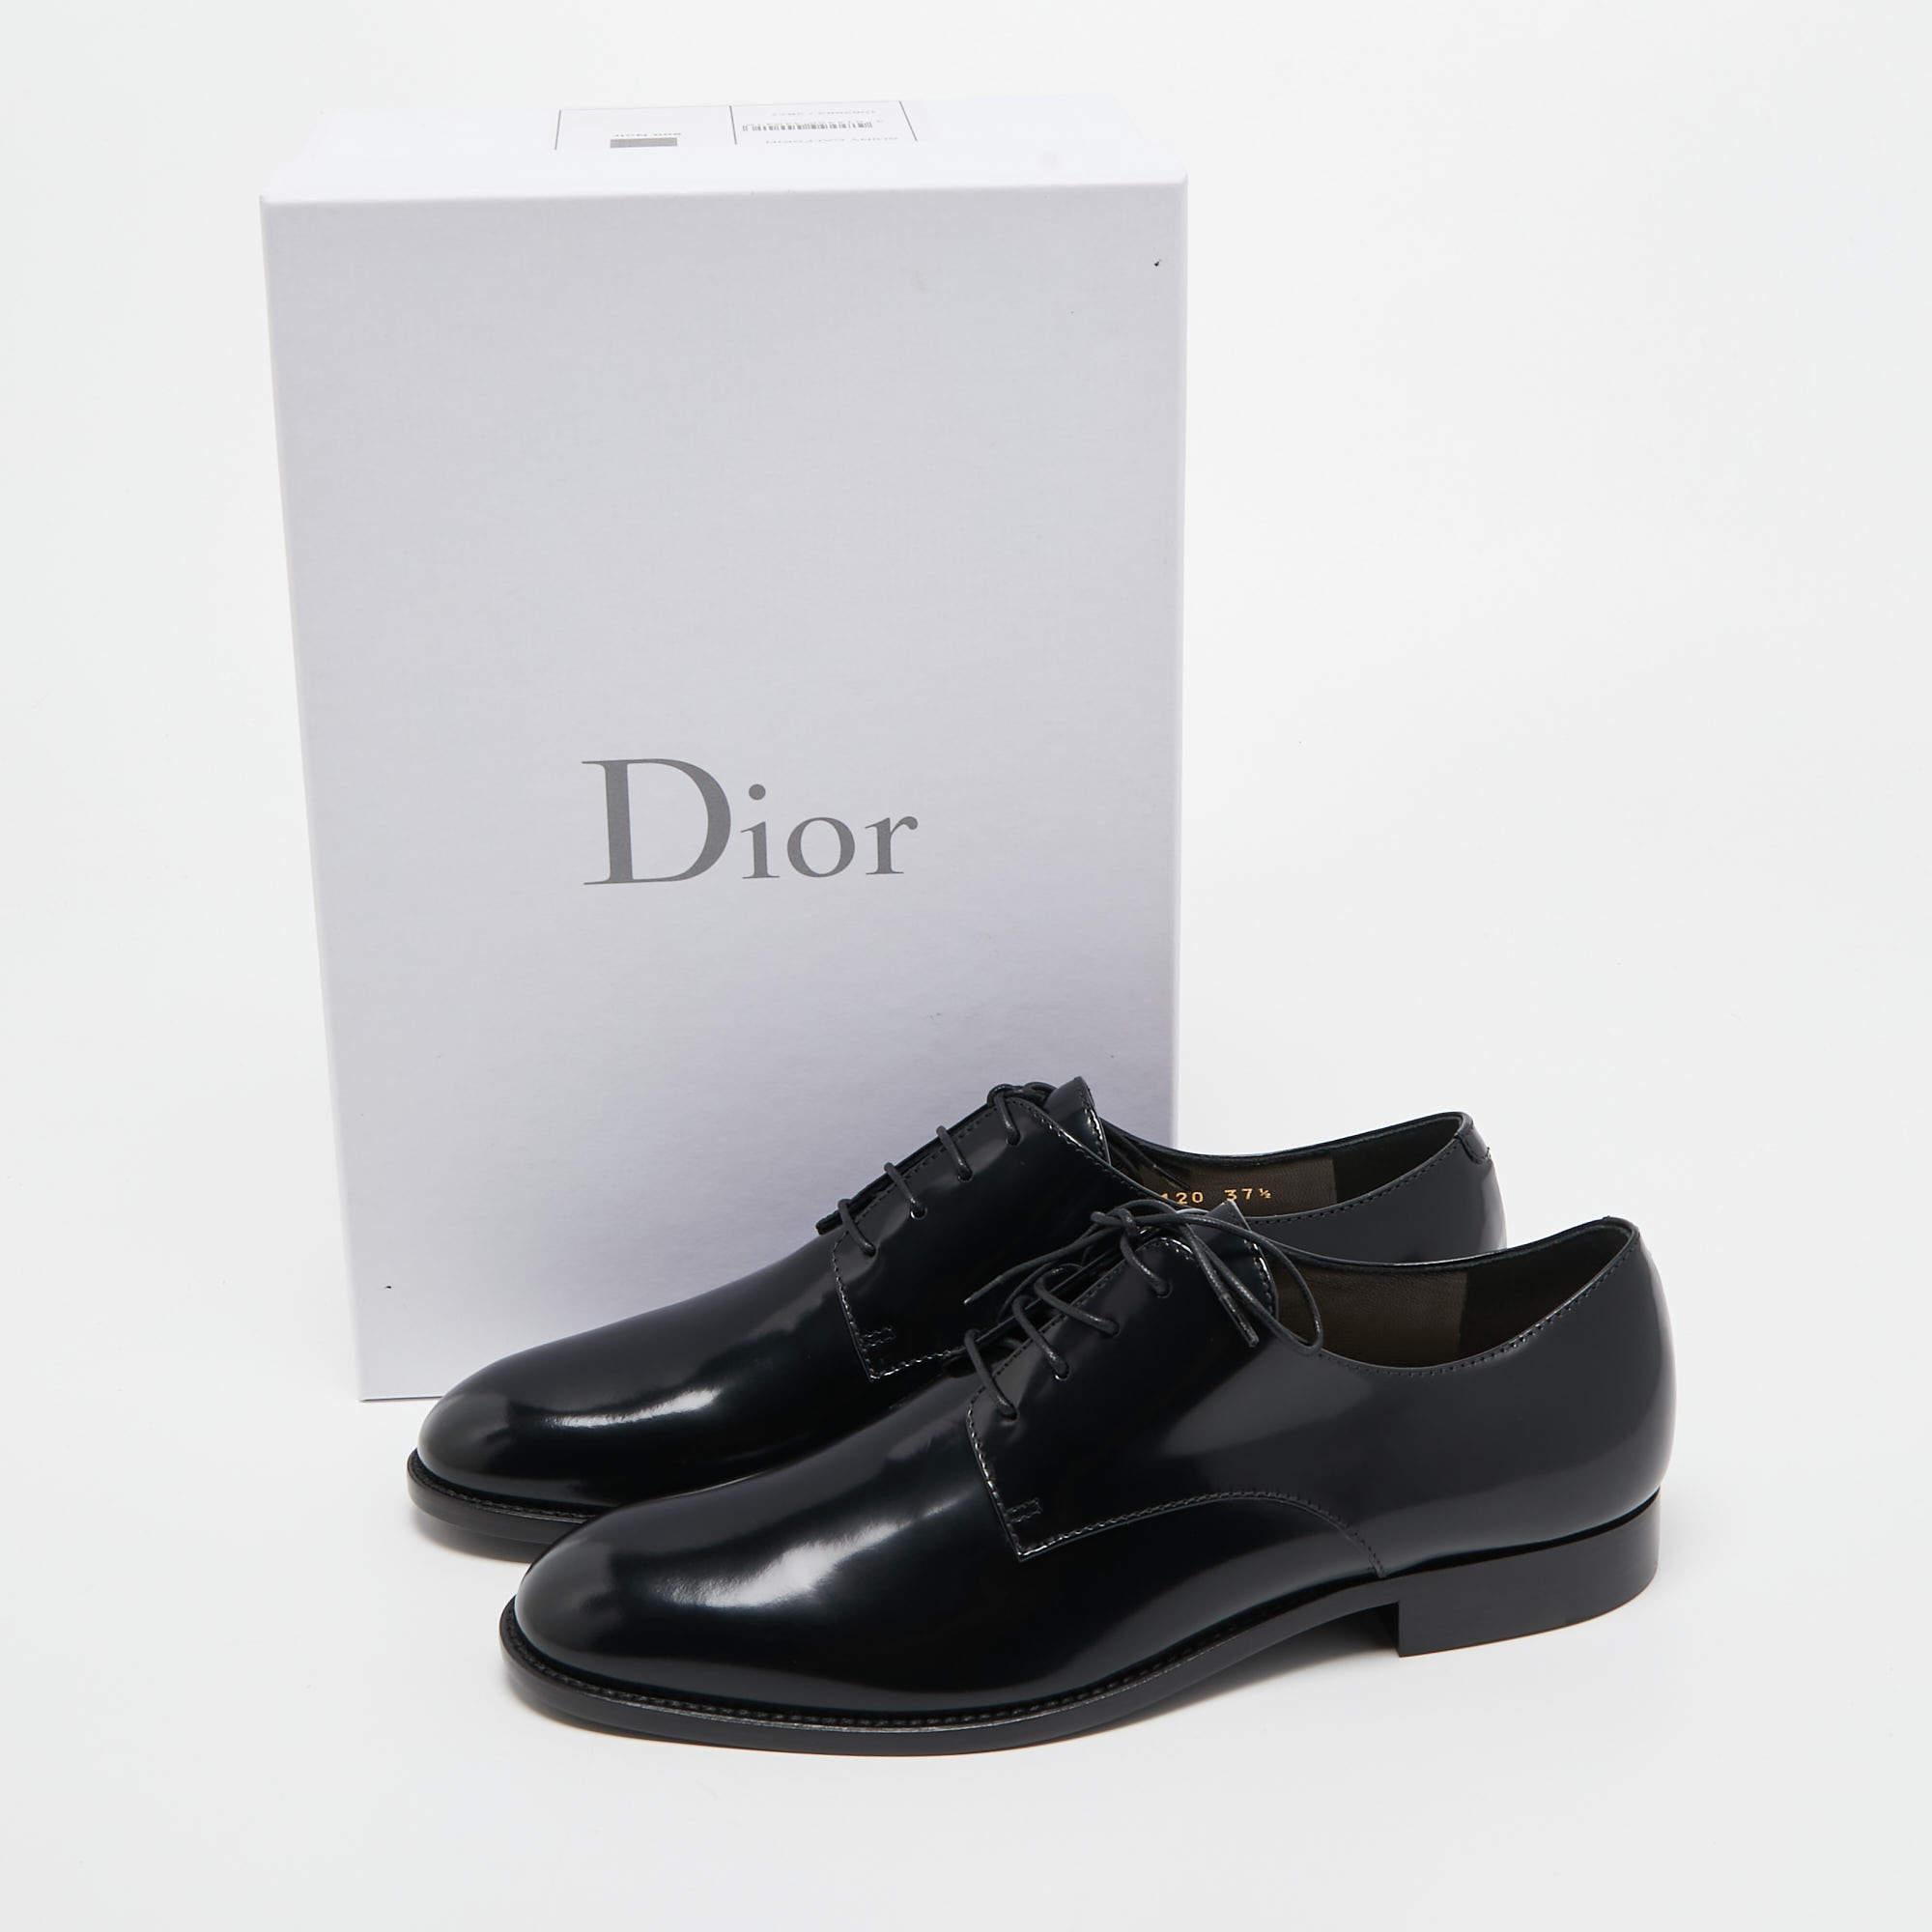 Christian Dior Black Leather Oxfords Size 37.5 4